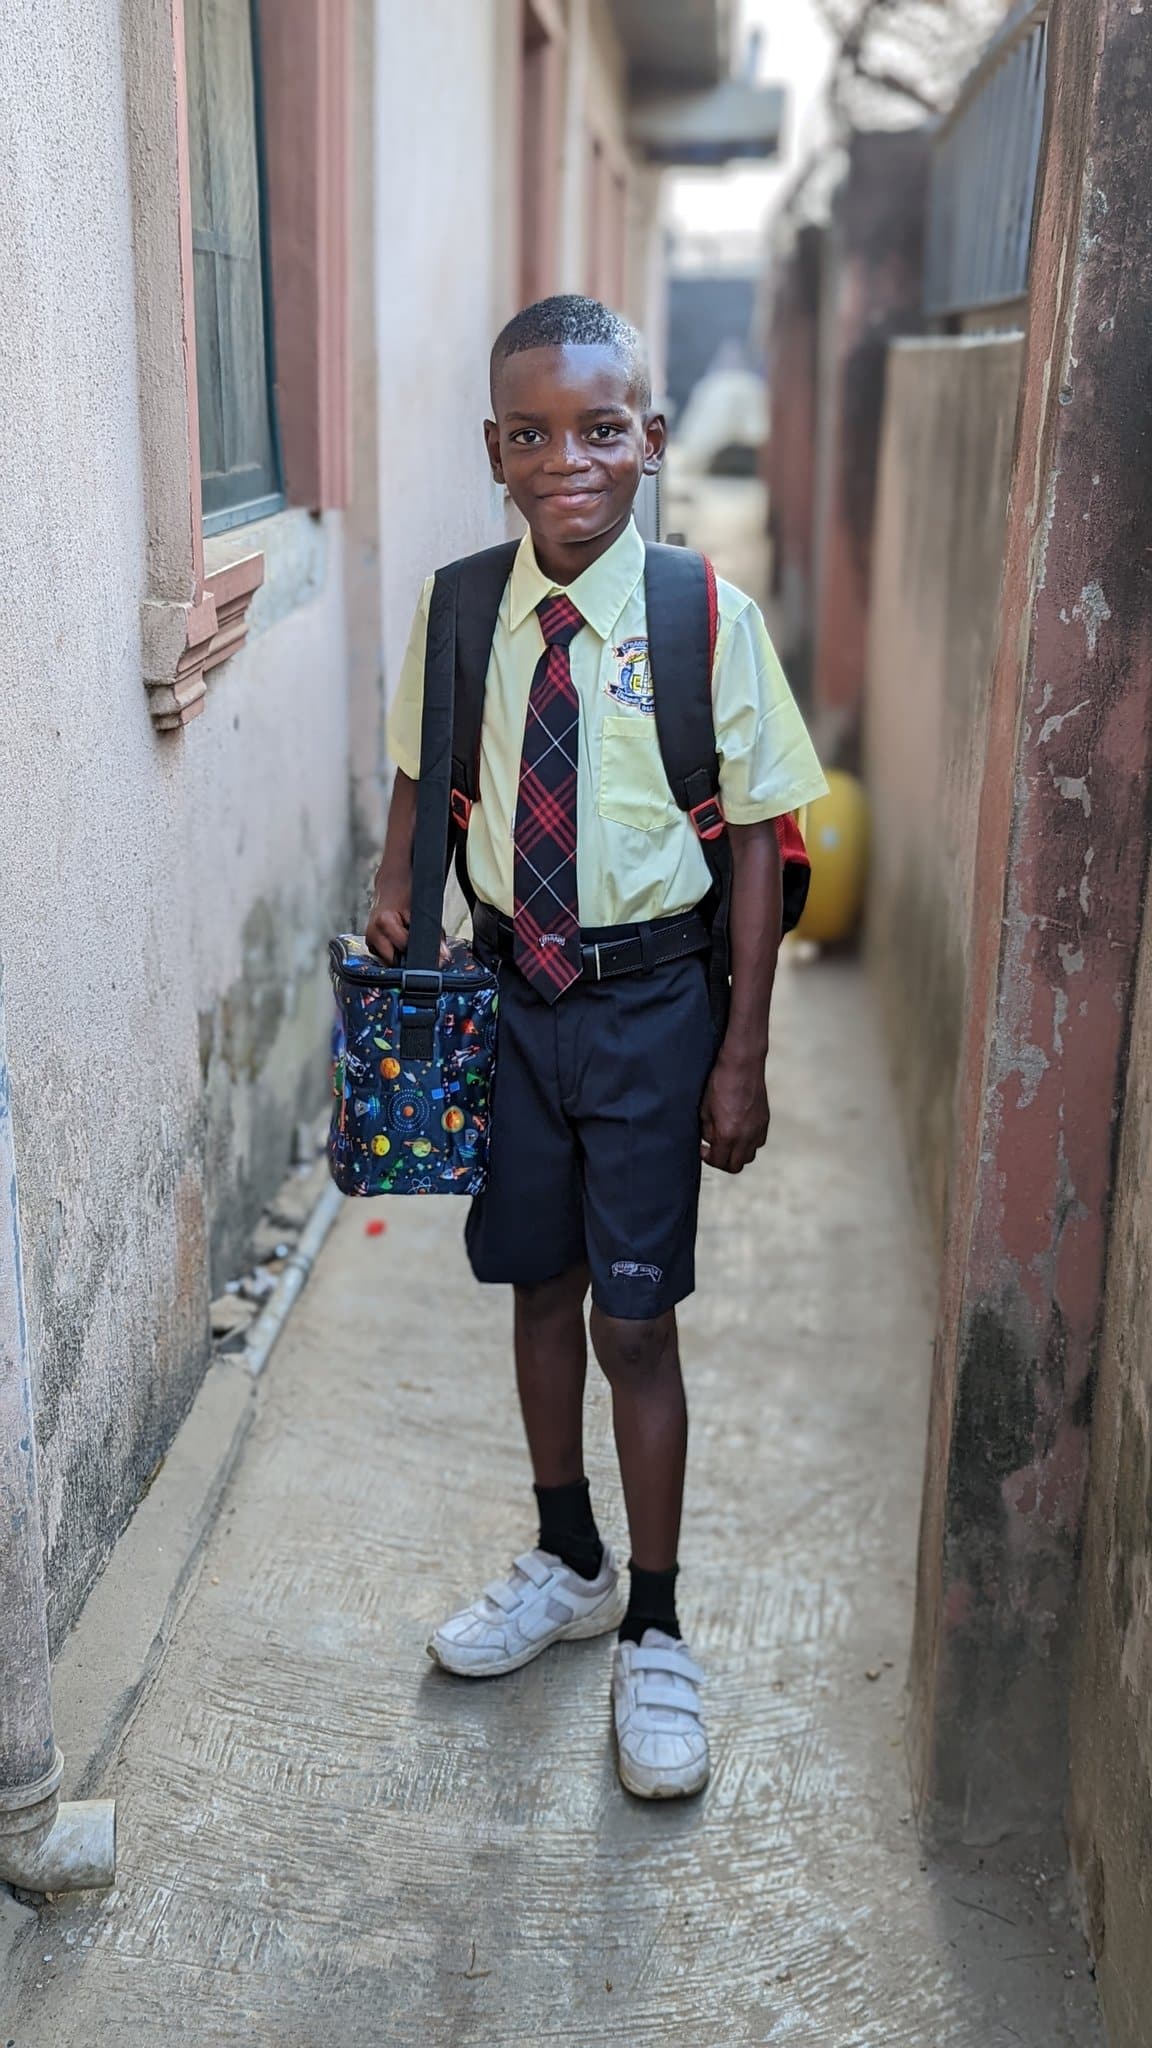 Kind man transforms life of poor kid he saw collecting scraps, enrols him in school [Photos]